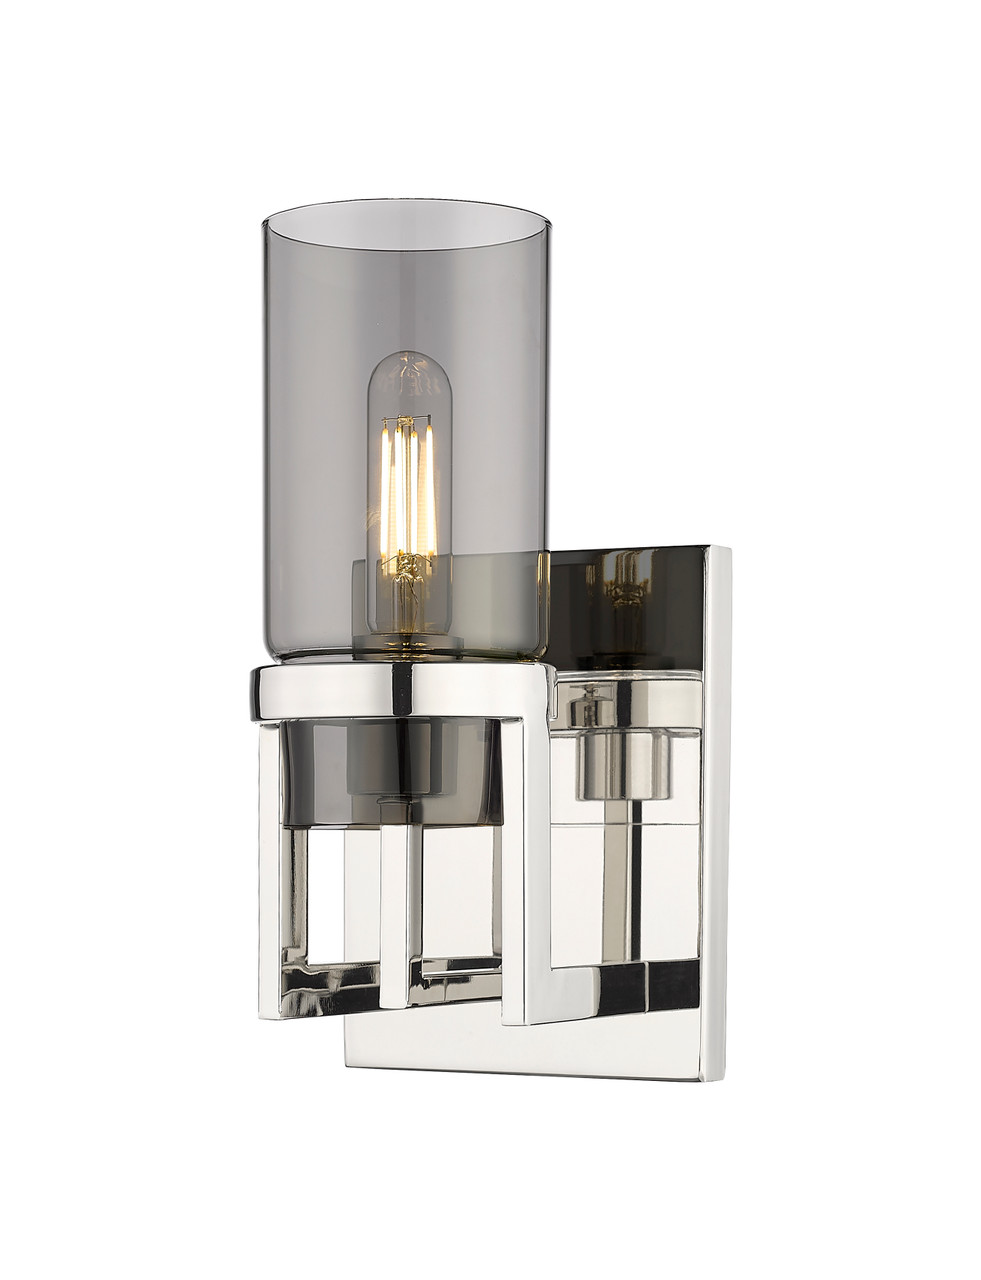 INNOVATIONS 426-1W-PN-G426-8SM Utopia 1 4.75 inch Sconce Polished Nickel